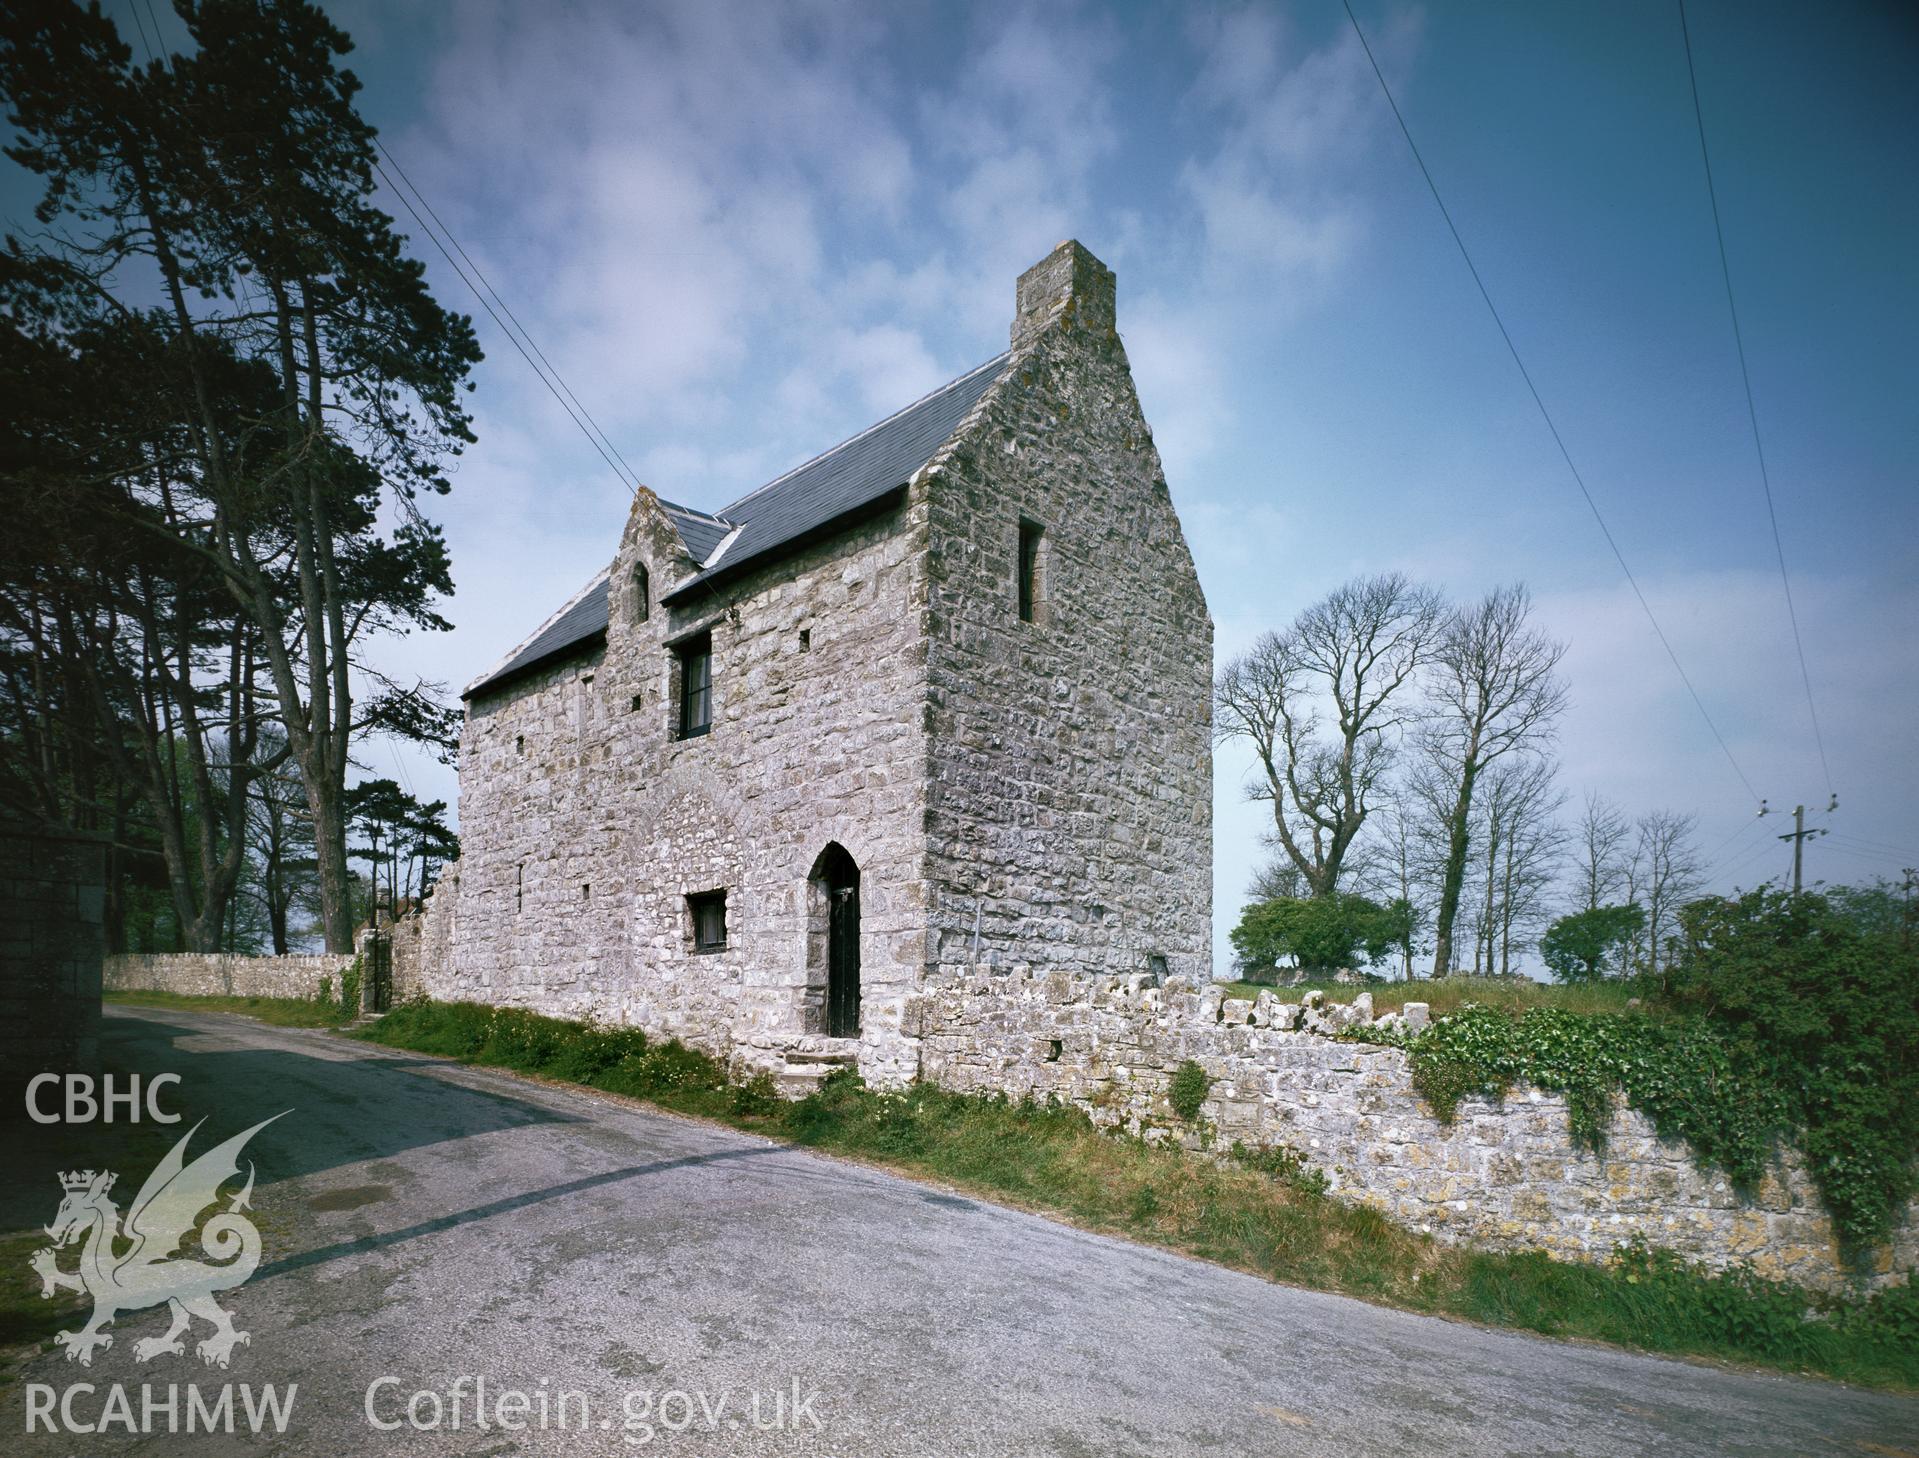 RCAHMW colour transparency showing an exterior view of the gatehouse at Llantwit Major Grange.